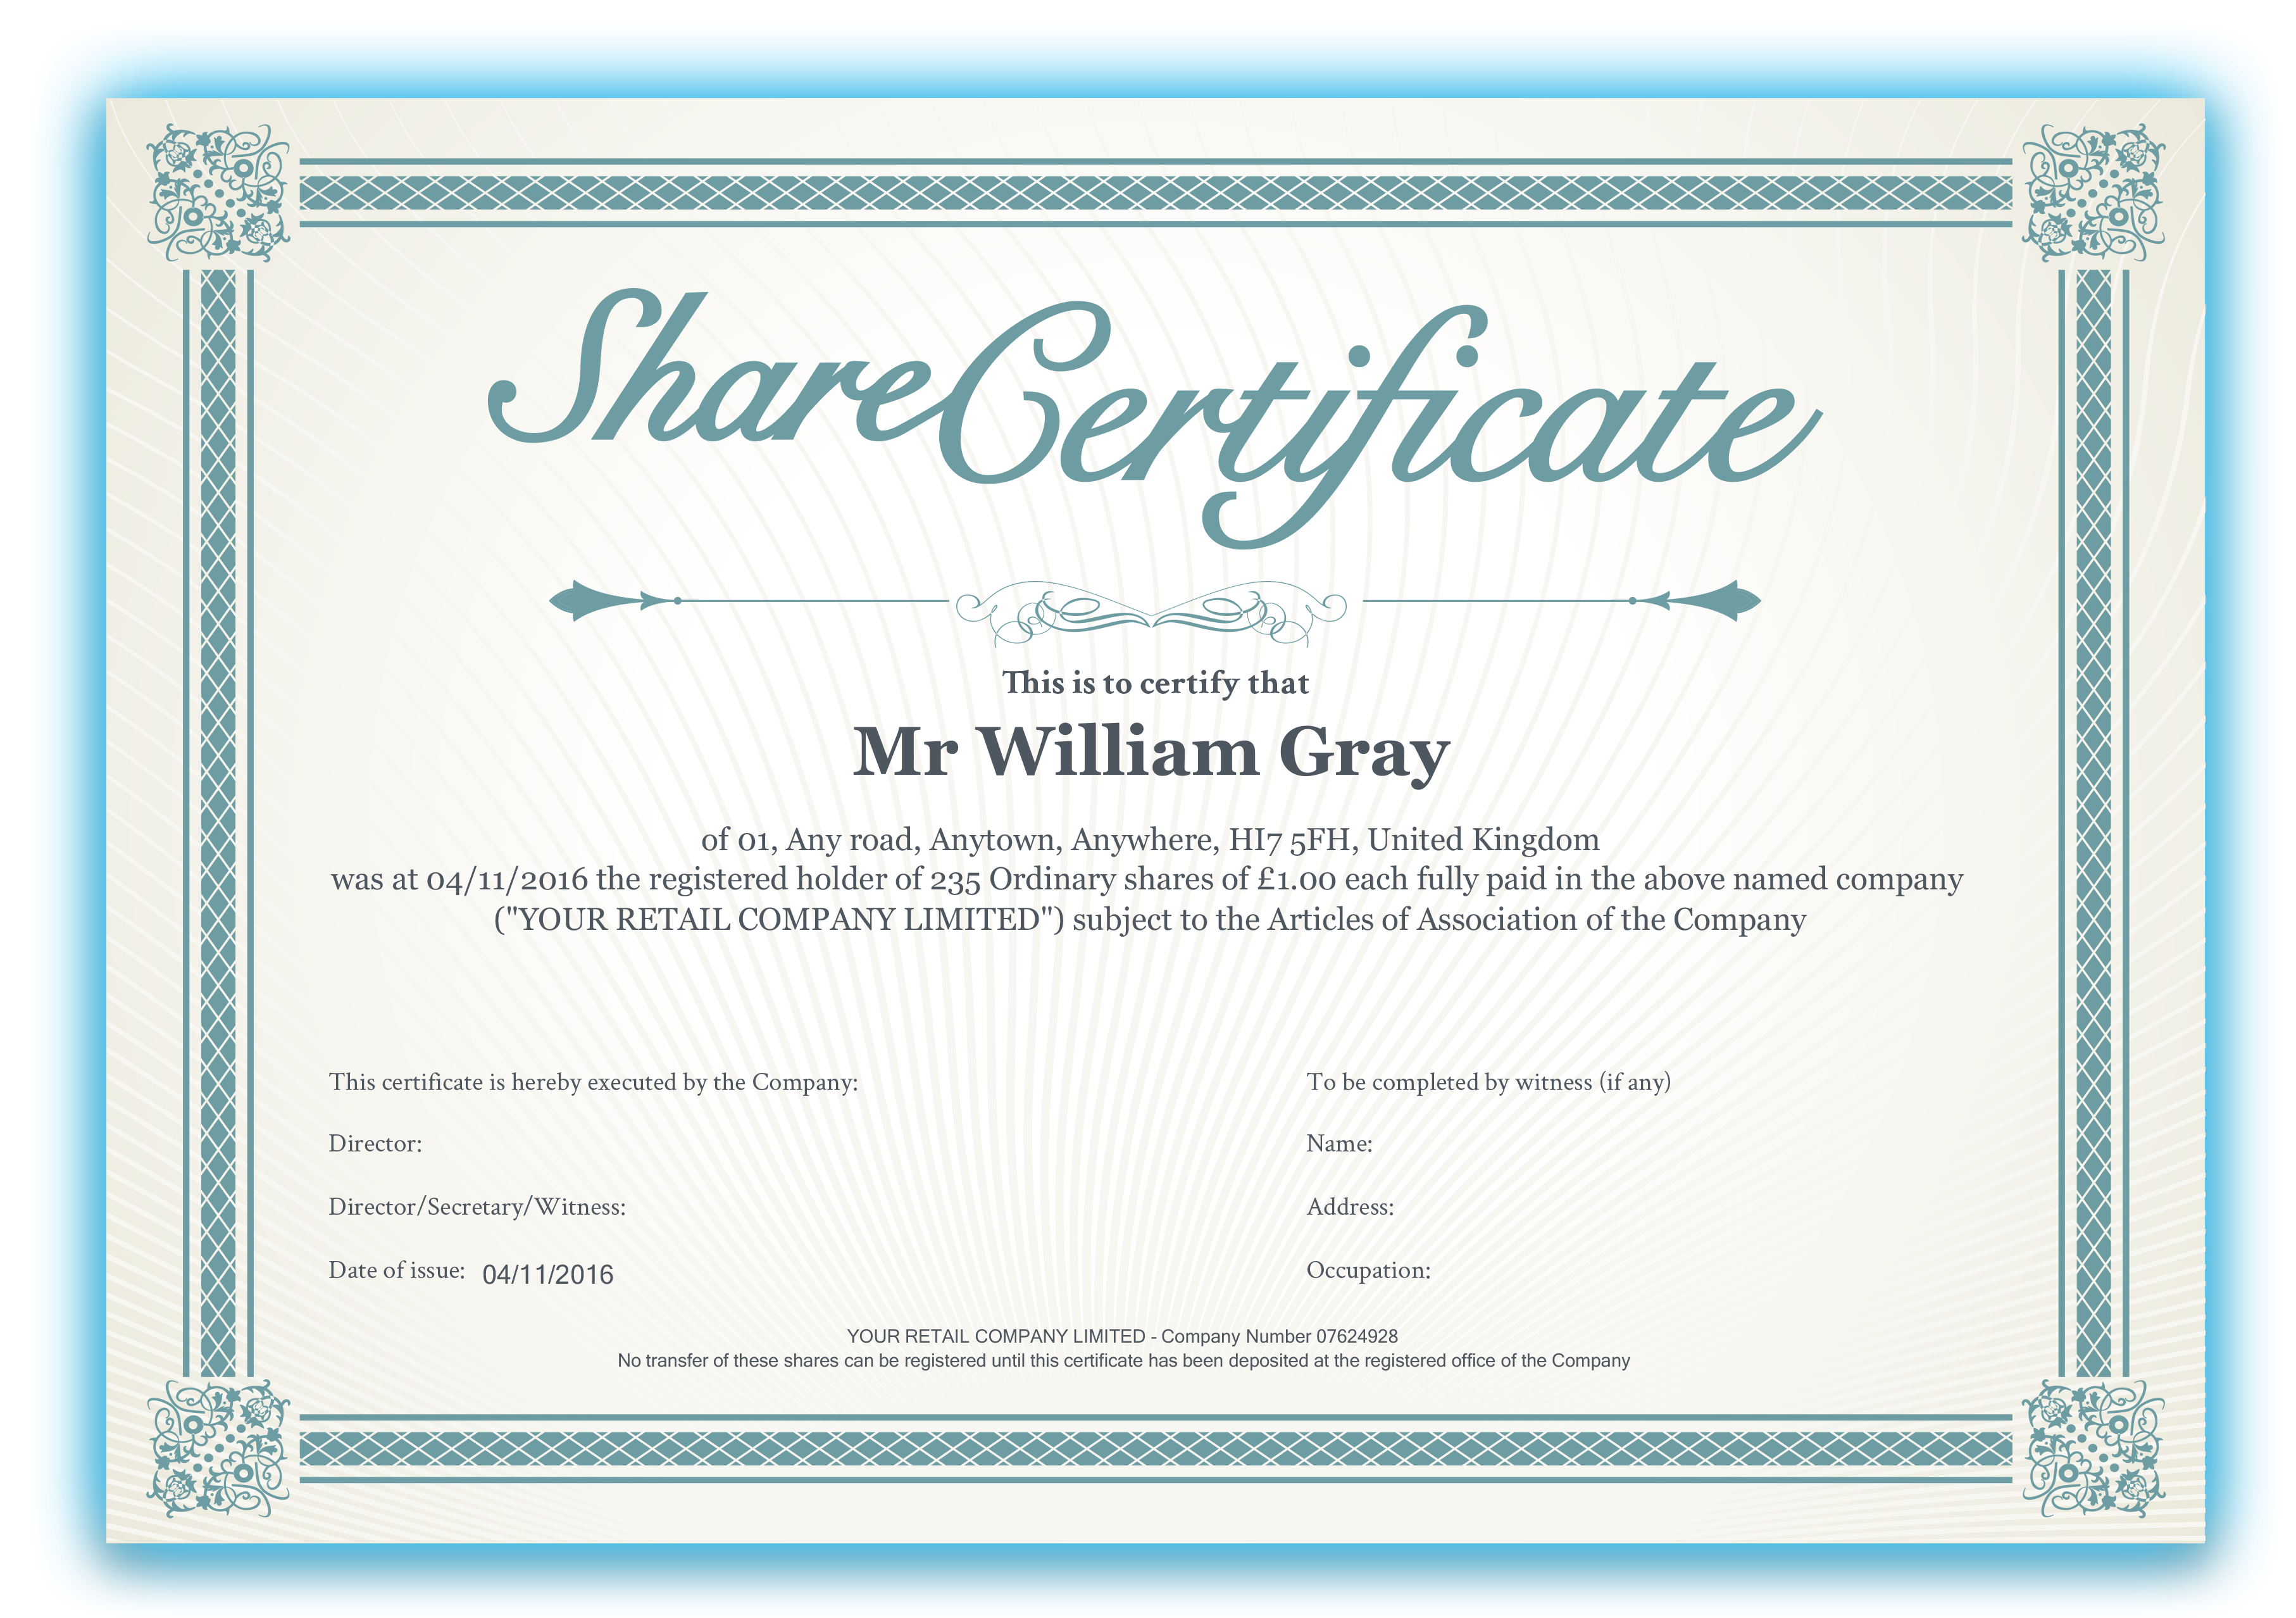 How Do I Add a Logo to the Share Certificate? : Inform Direct Support In Shareholding Certificate Template